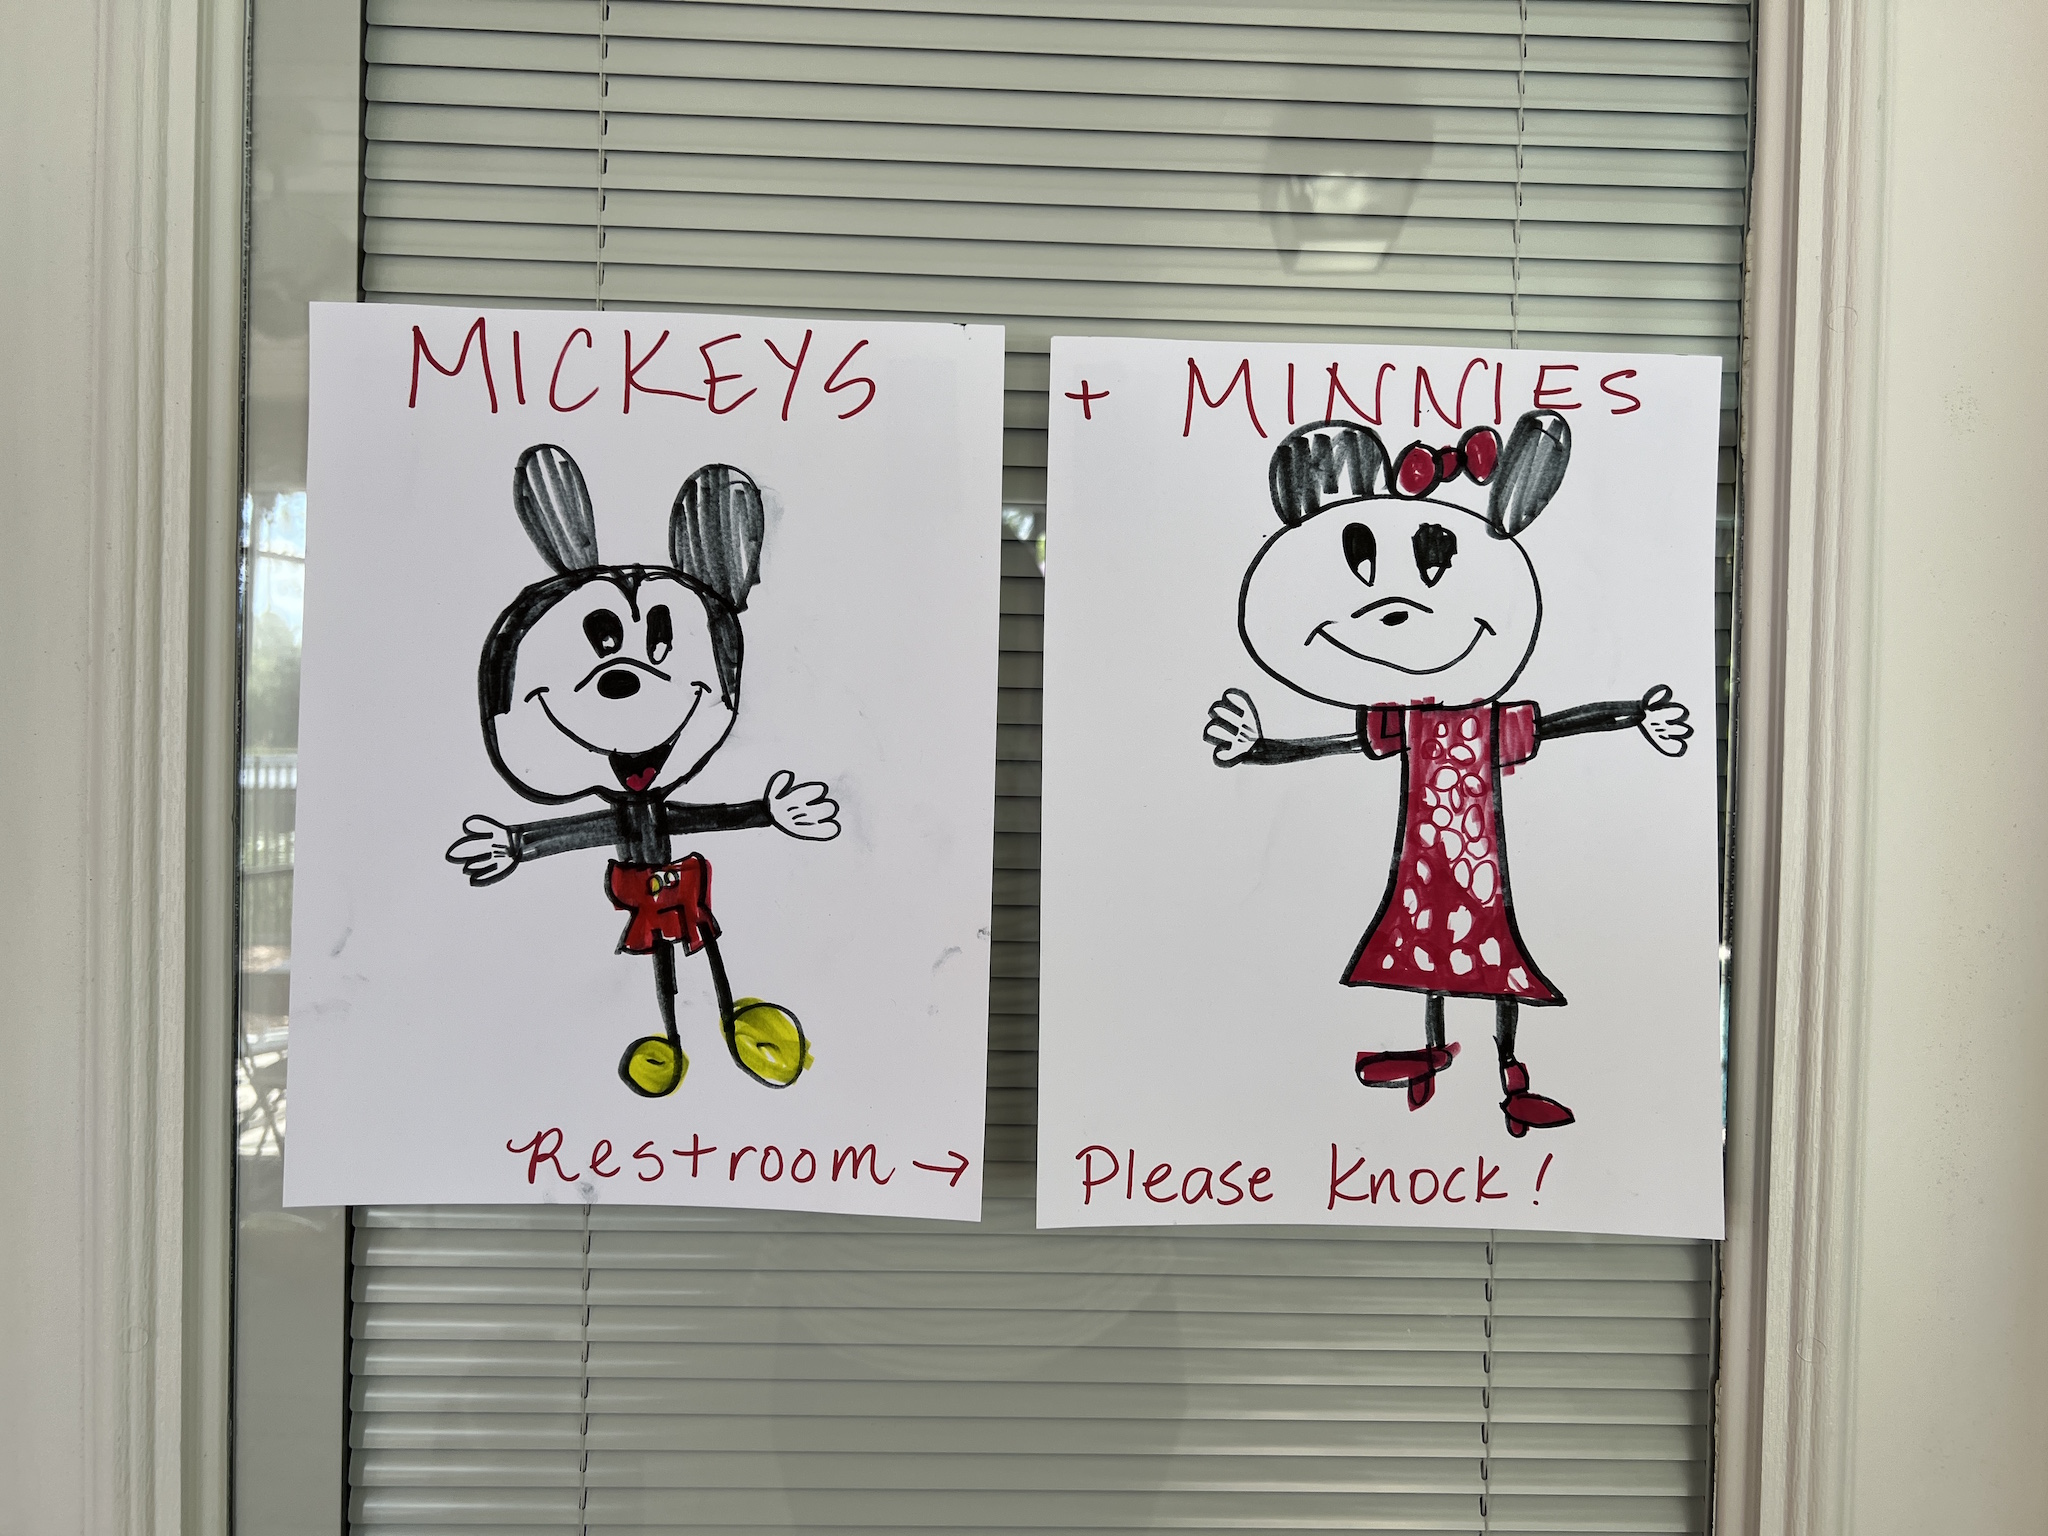 "Mickeys & Minnies" restroom door signs at Pepper's Magical "Mickey & Minnie Mouse" 3rd Birthday Pool Party | Creative ideas for hosting a magical Mickey & Minnie themed birthday bash for your little Mouseketeer with do-able decor, punny snacks, and party games that are fun for all ages! via thinkingcloset.com